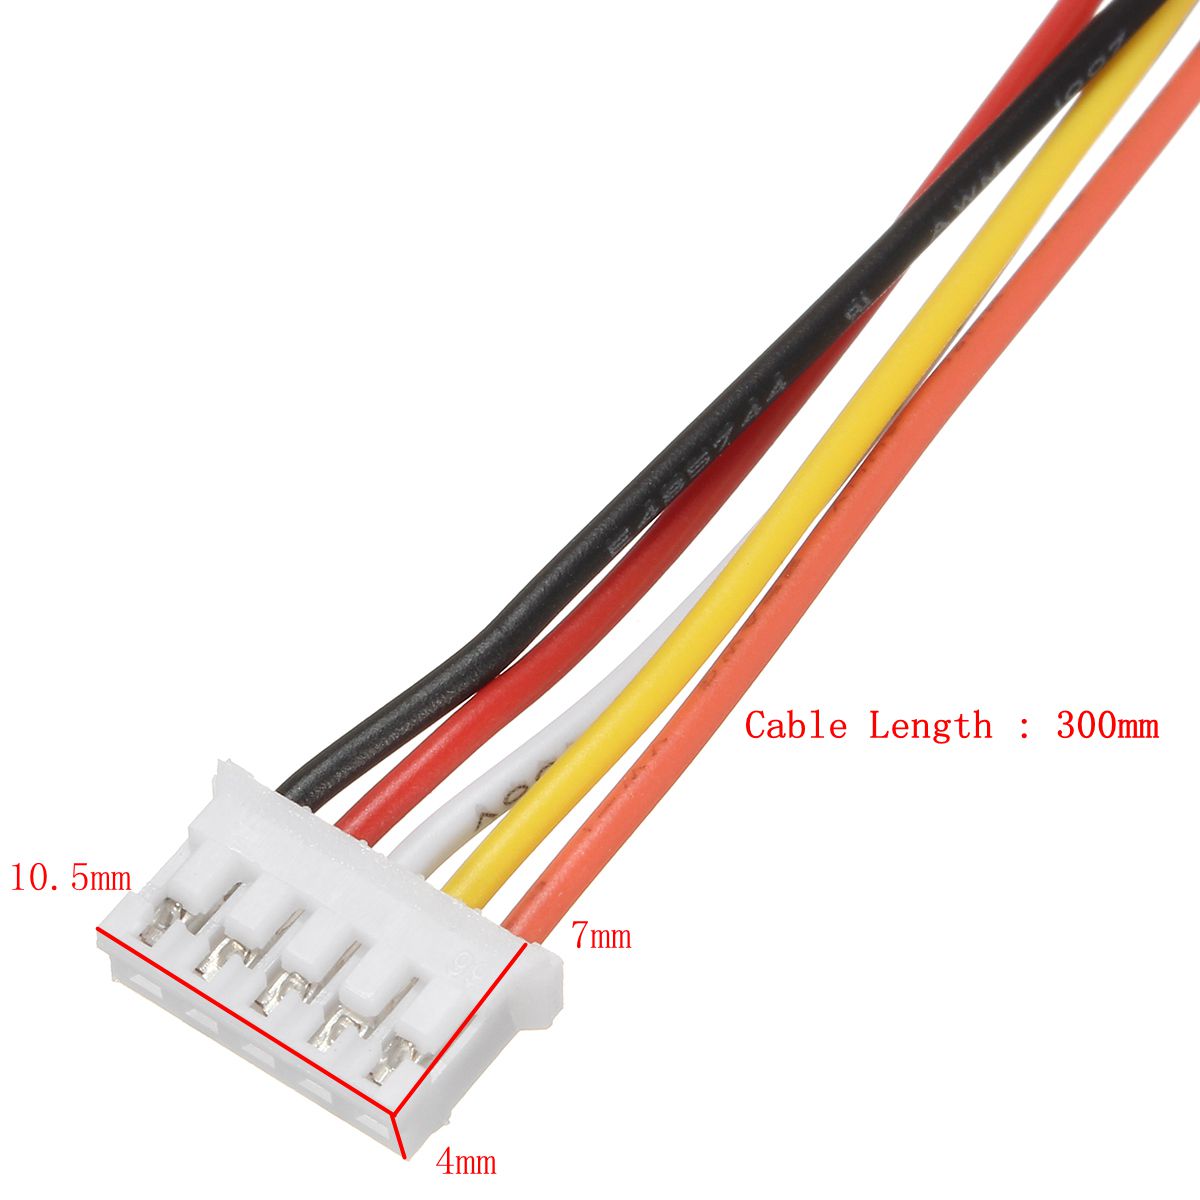 Excellwayreg-10Pcs-Mini-Micro-JST-20-PH-5Pin-Connector-Plug-With-30cm-Wires-Cables-1147293-7